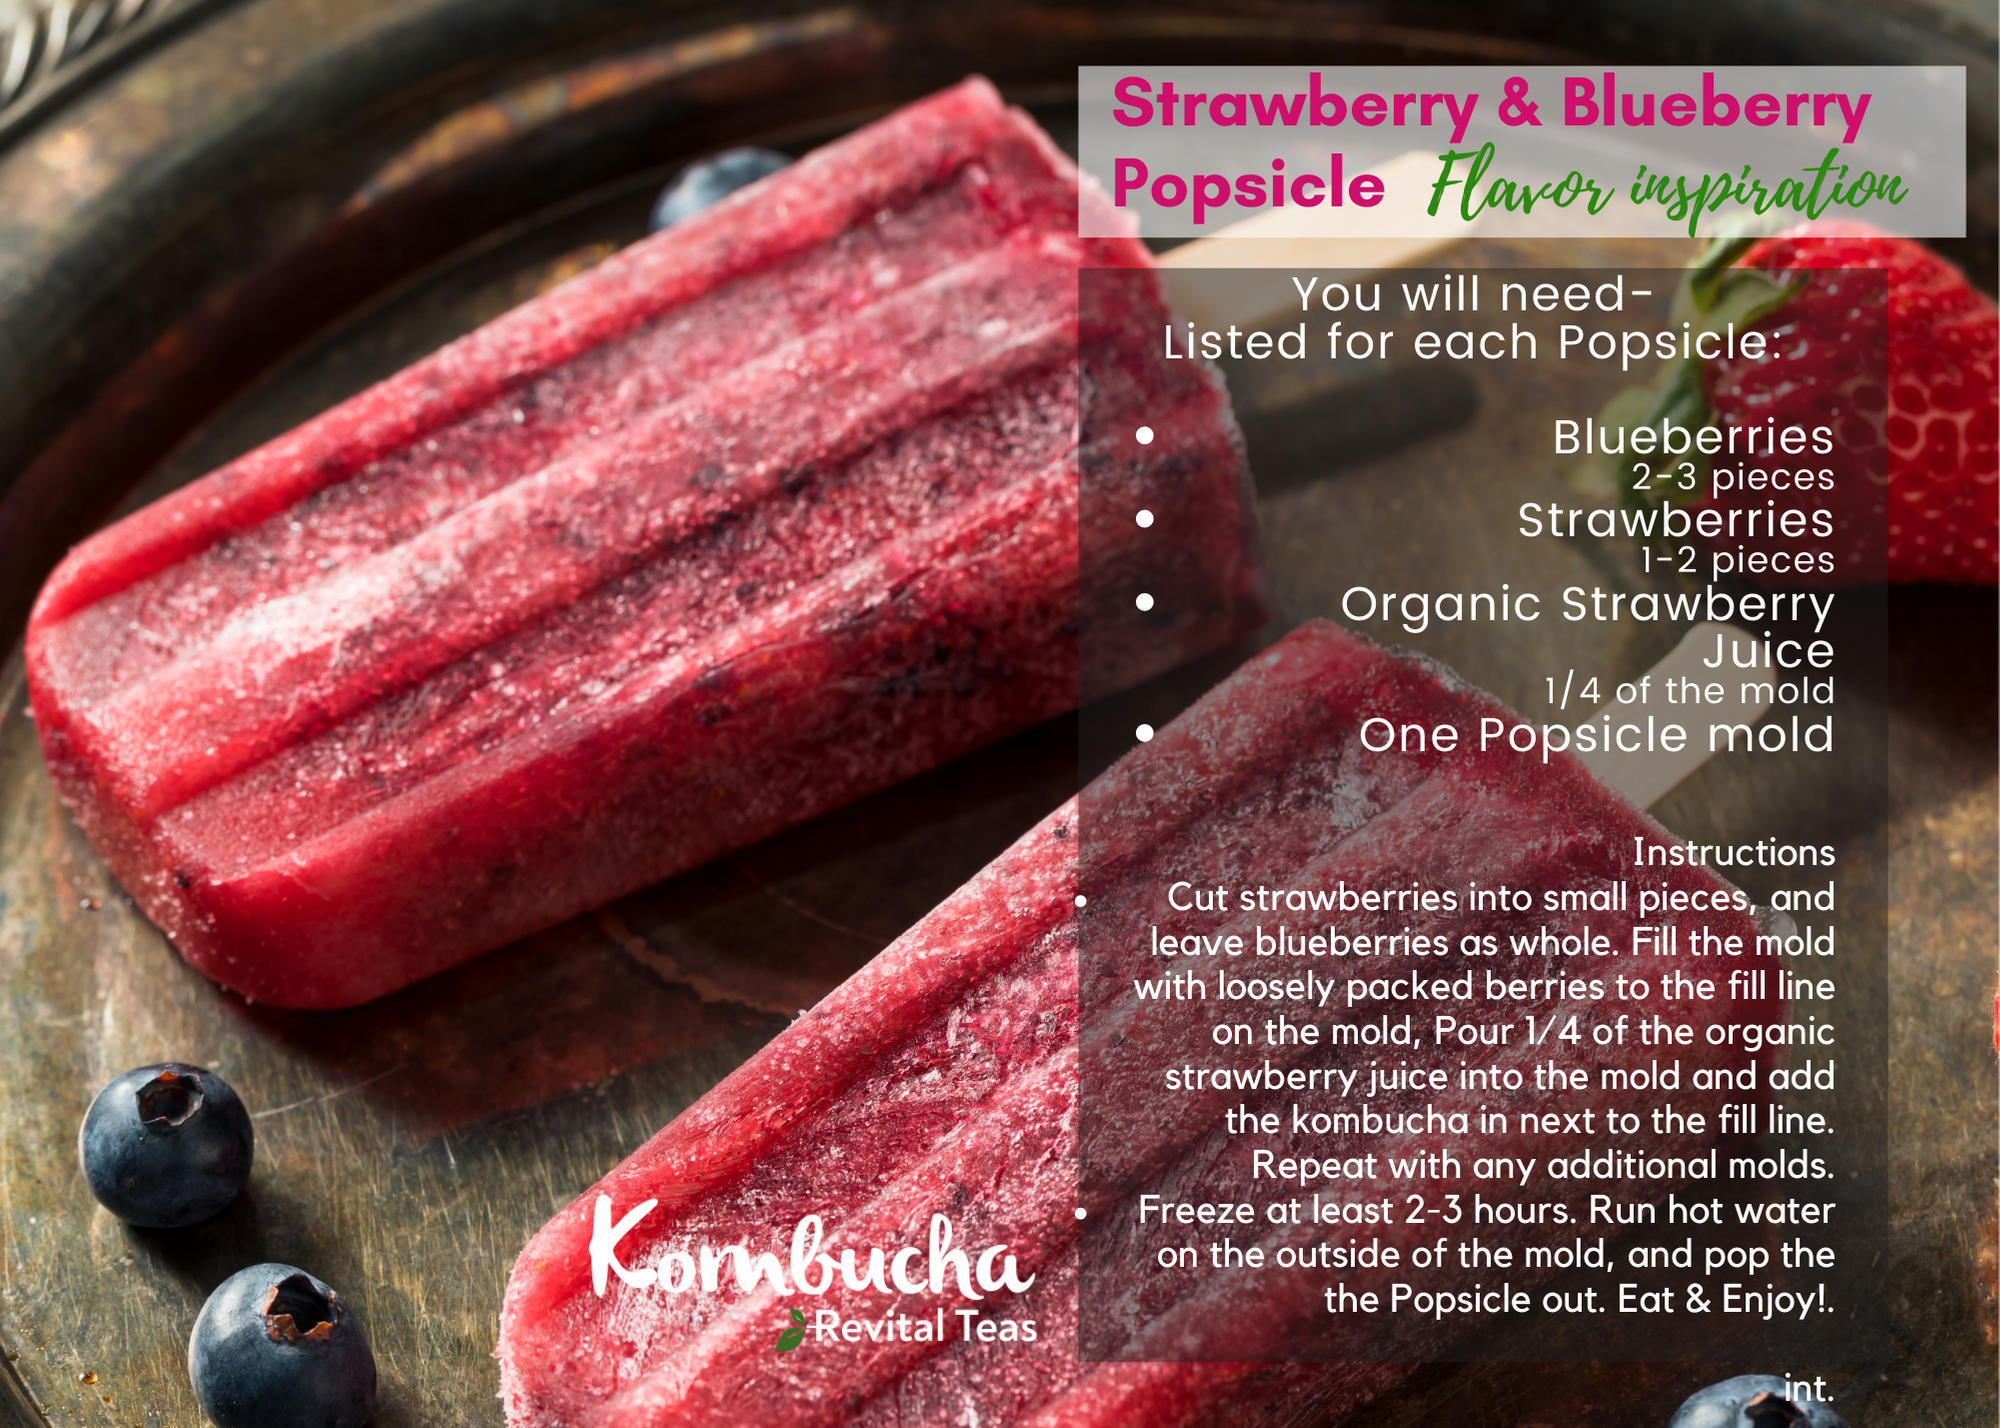 Strawberry & Blueberry Popsicle